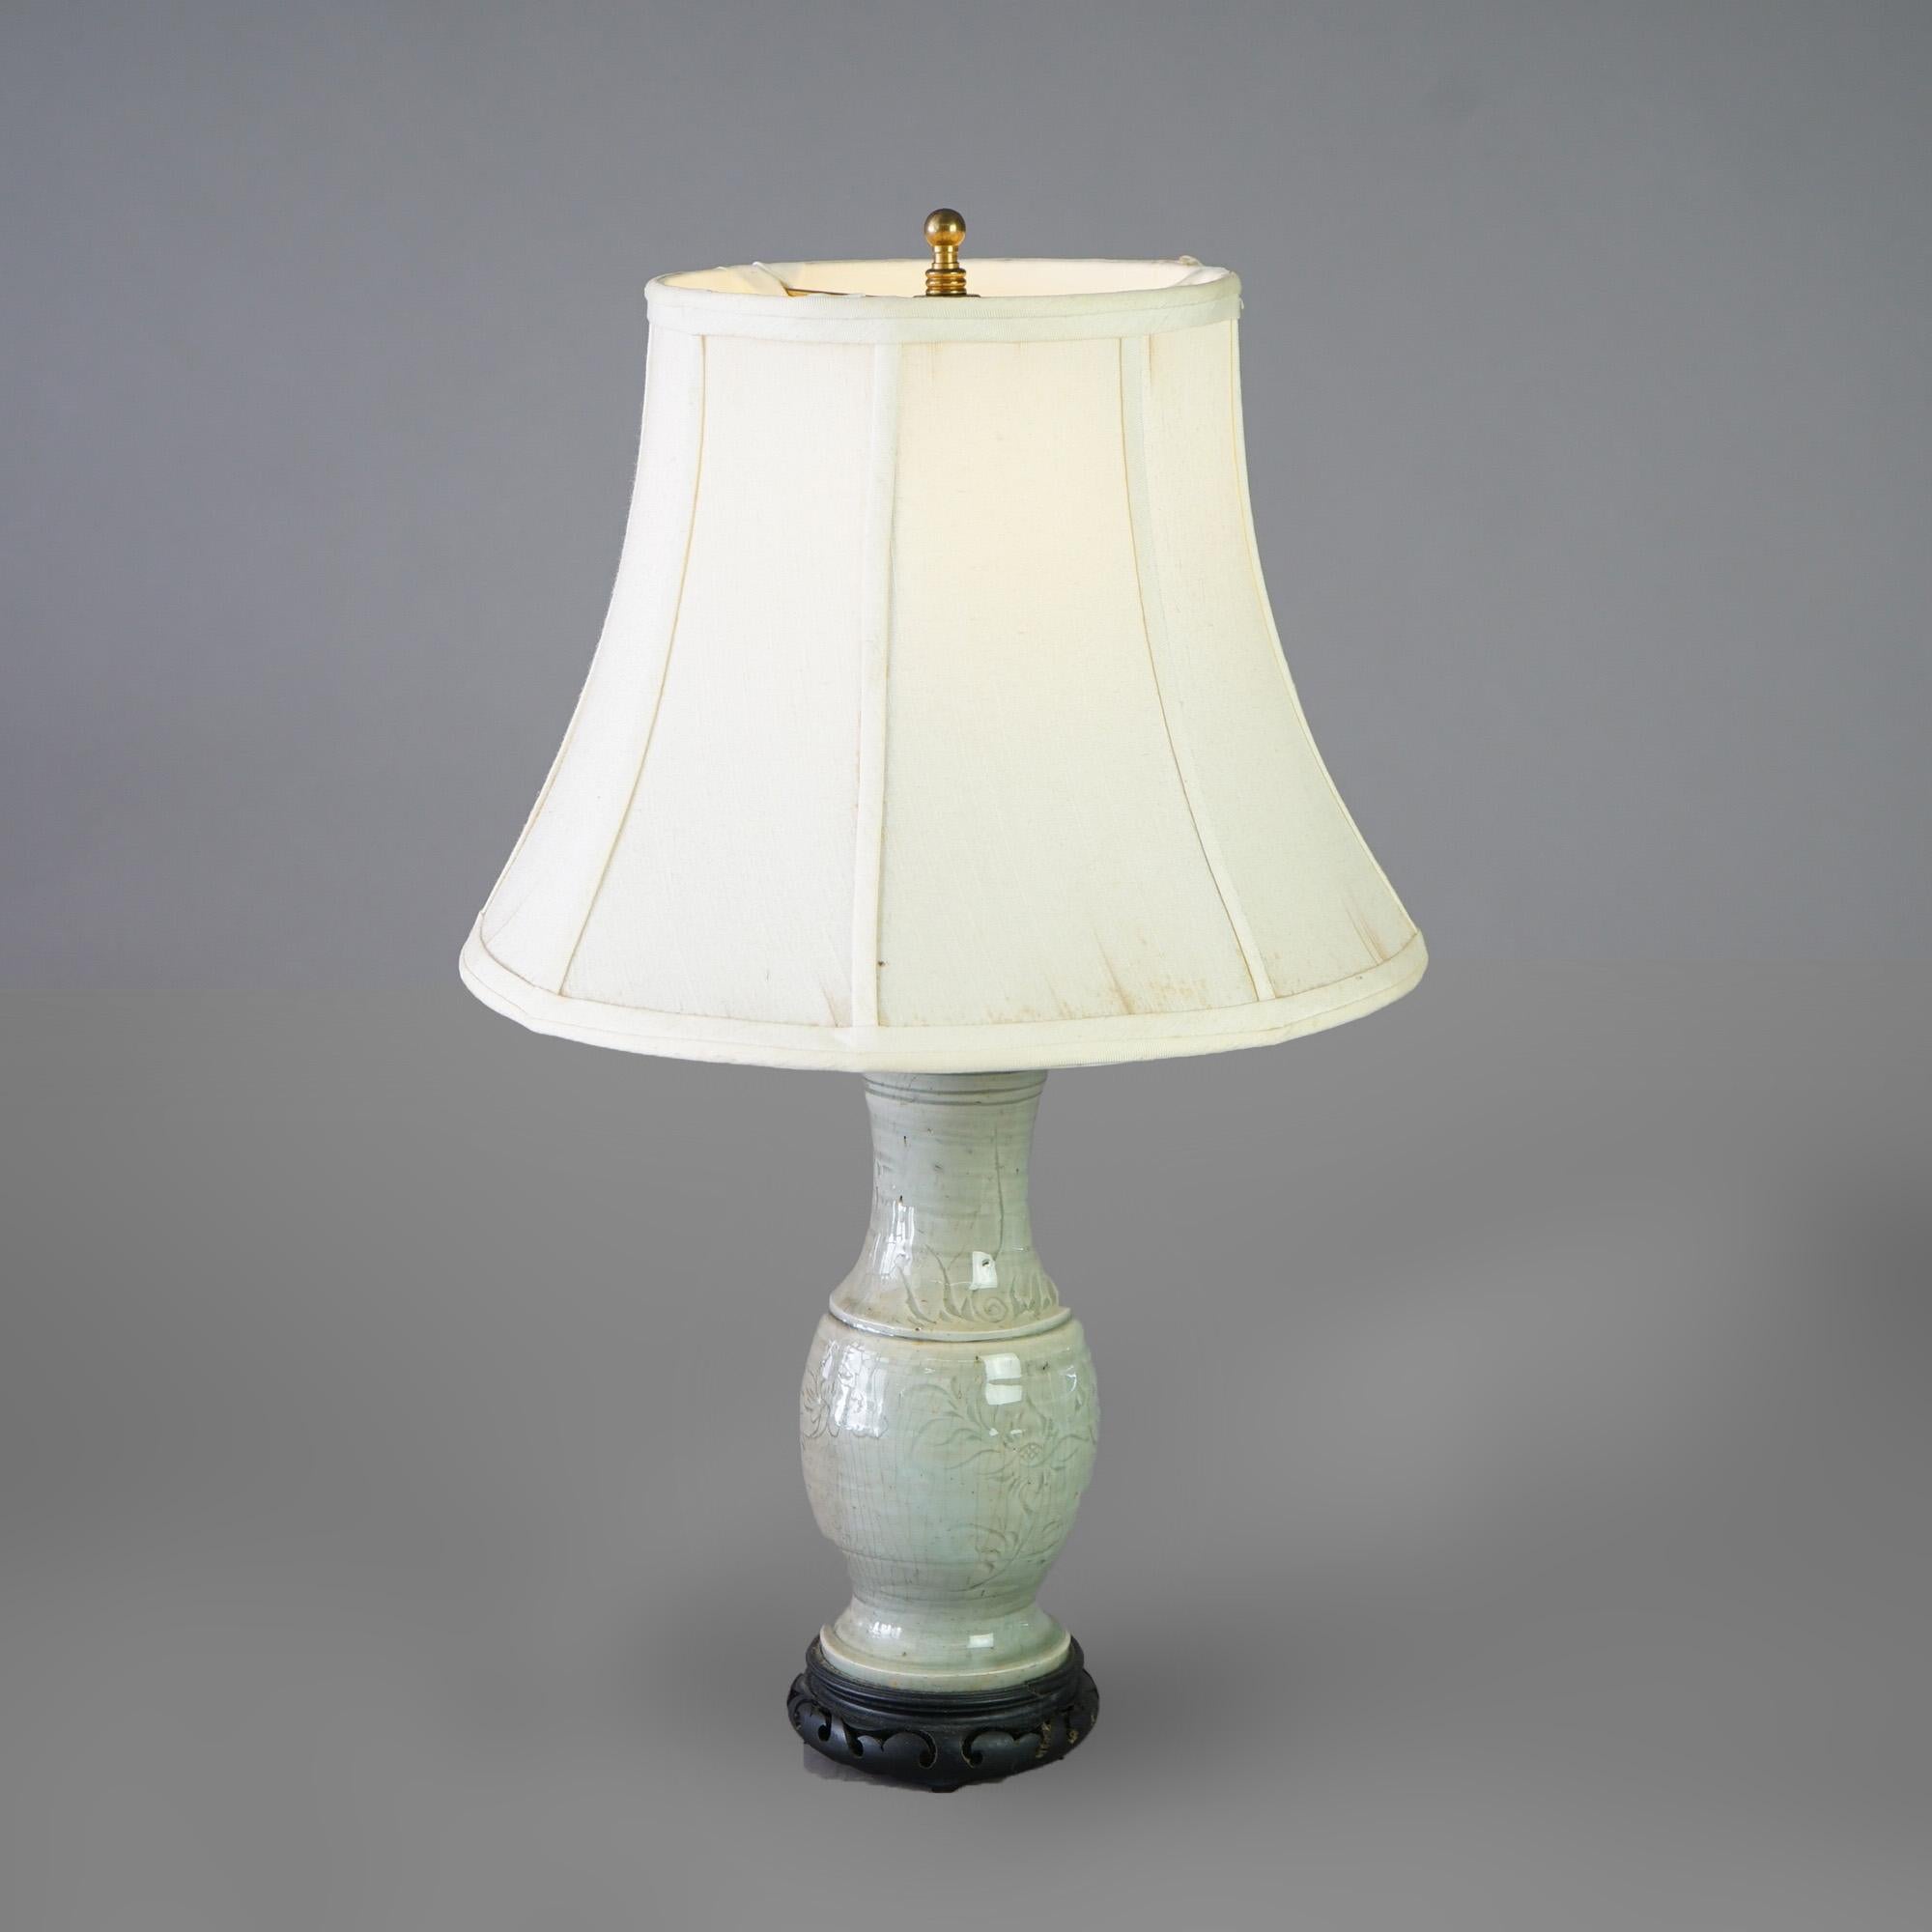 Antique Chinese Celadon Glazed Foliate Incised Art Pottery Table Lamp C1930 4